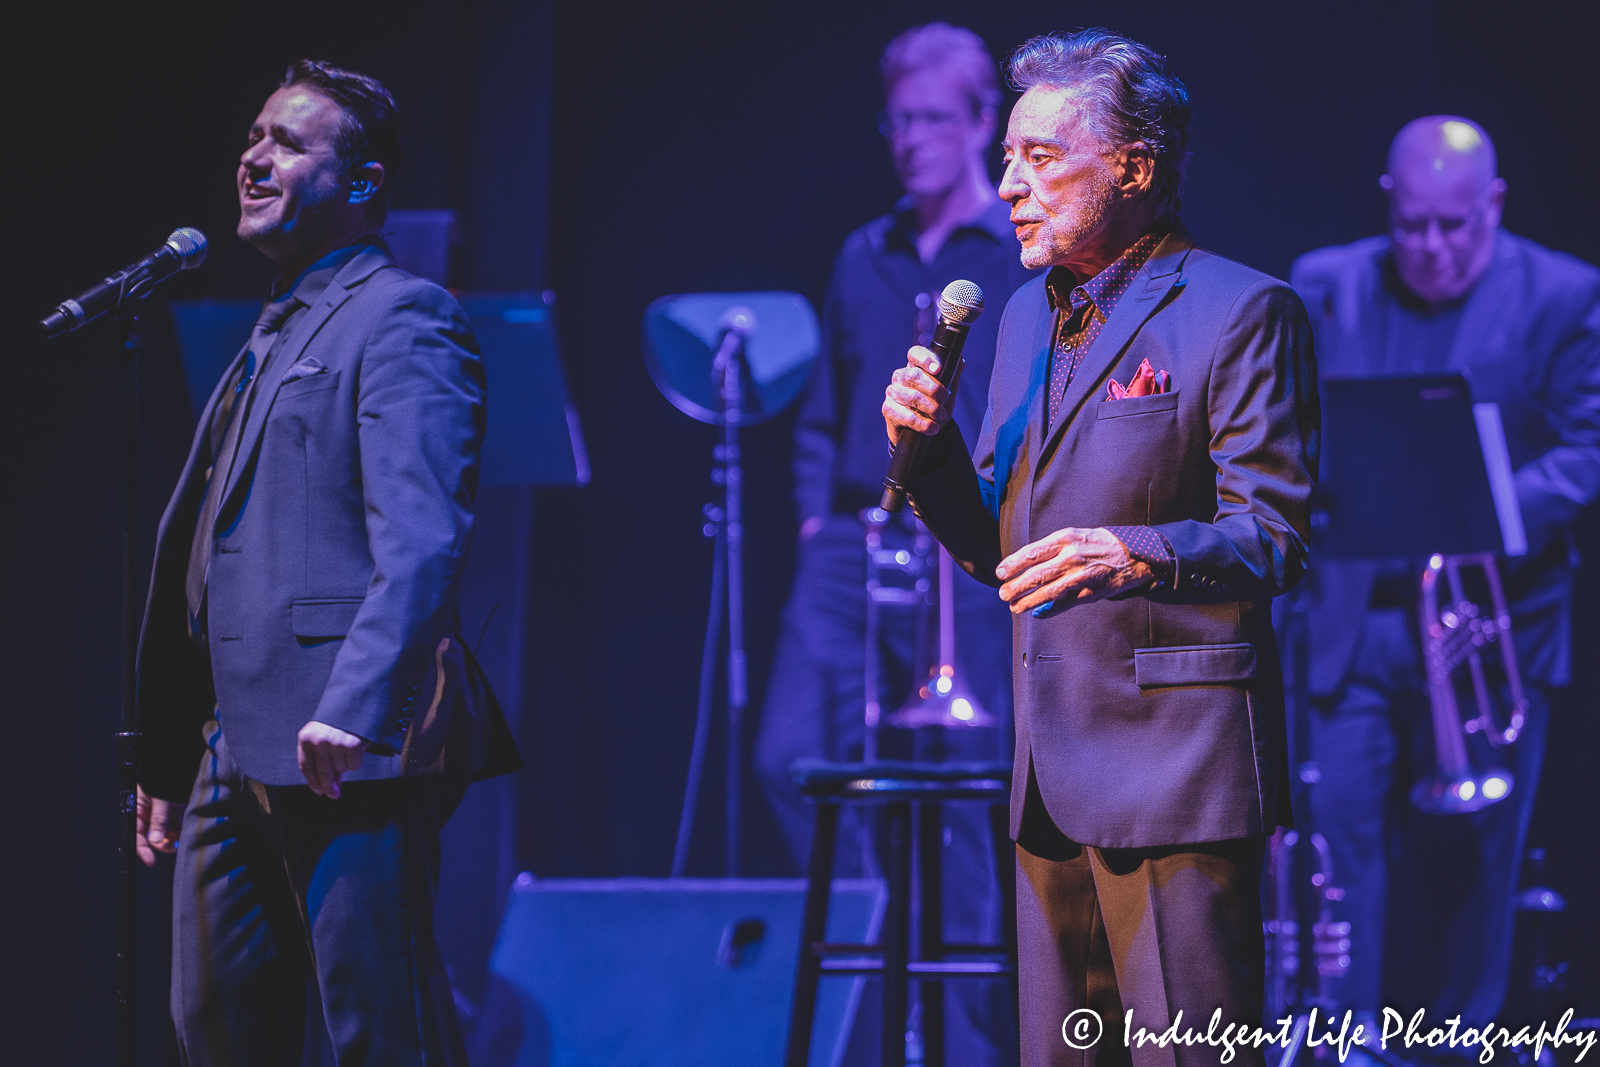 Frankie Valli singing live in concert at Muriel Kauffman Theatre in downtown Kansas City, MO on June 4, 2022.